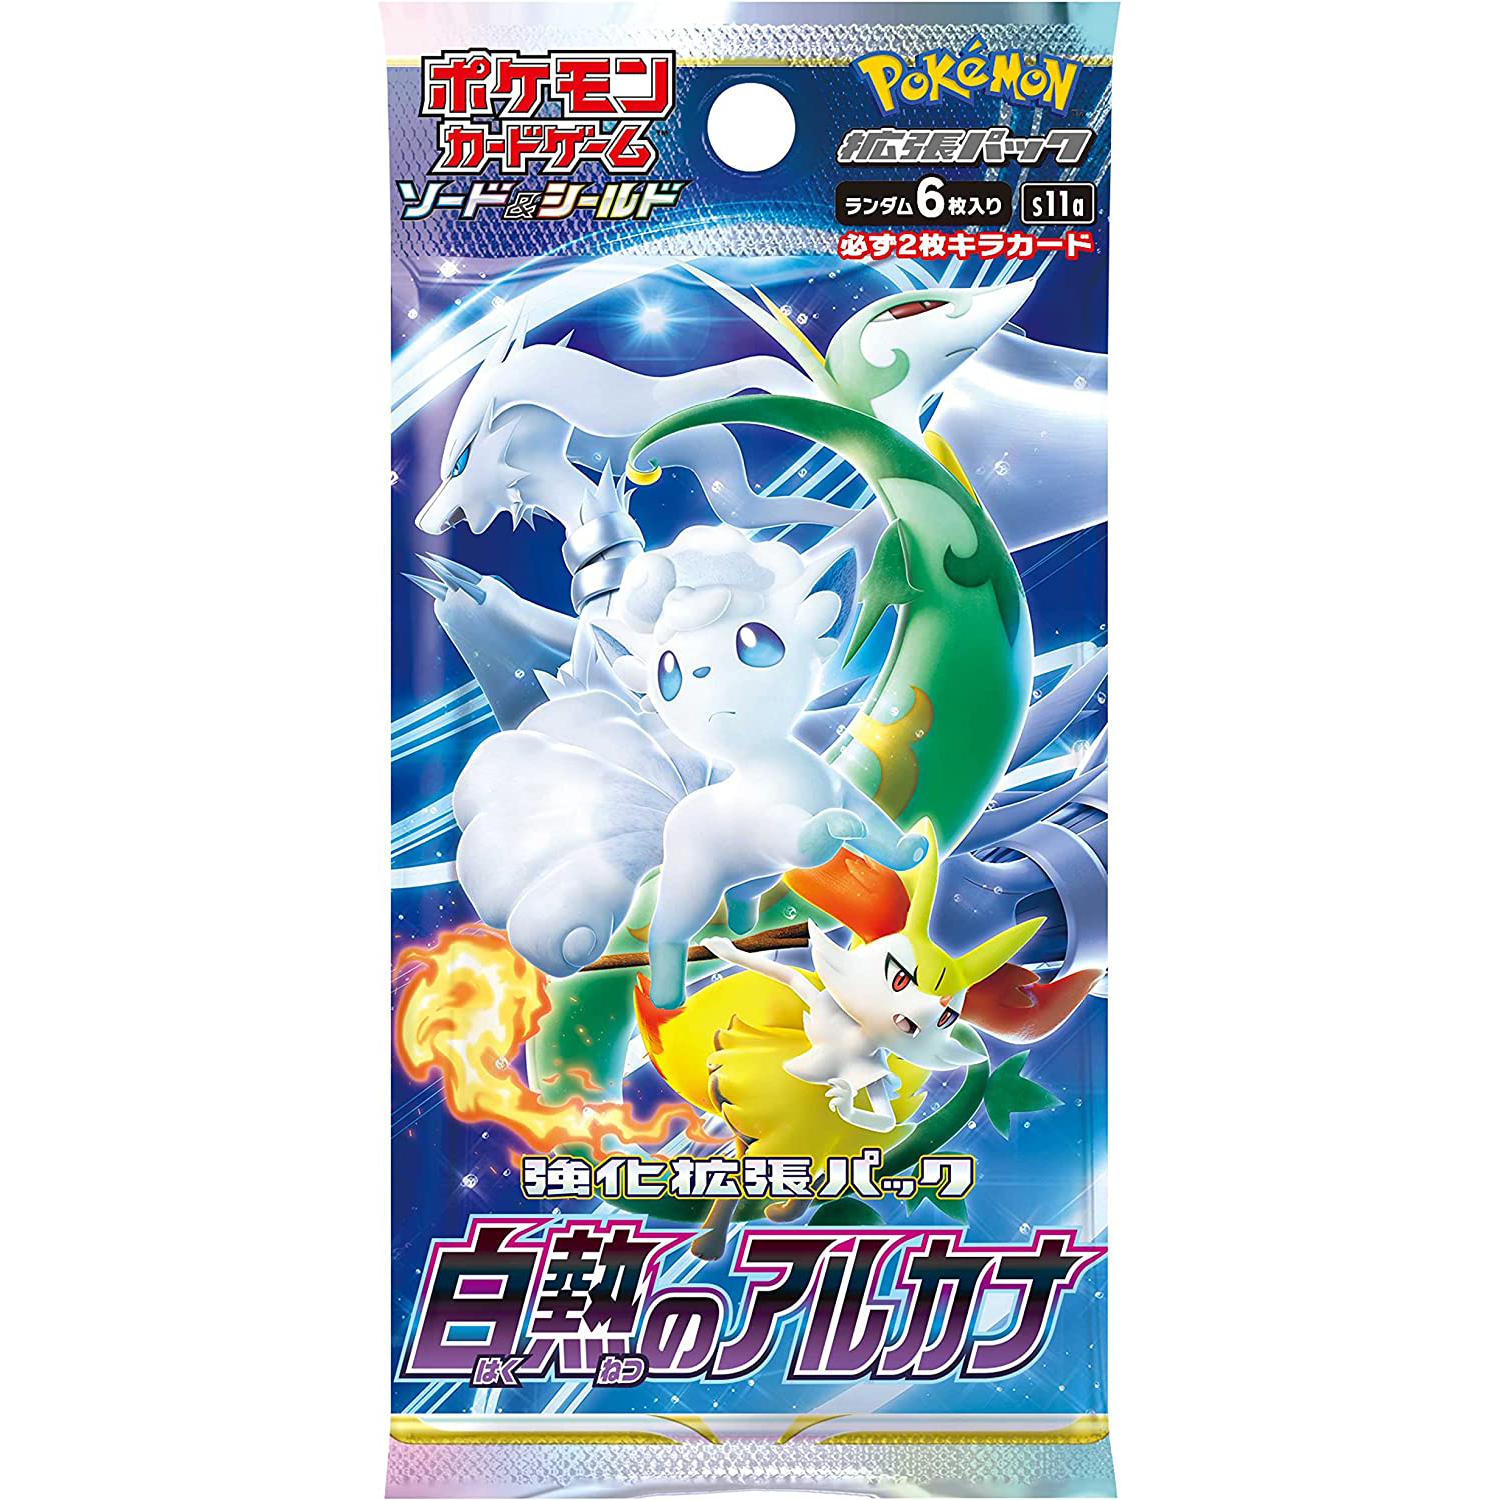 [s11a] POKÉMON CARD GAME Sword & Shield Expansion pack ｢Incandescent Arcana｣ Booster  Release date: September 2 2022  1 pack / 6 cards